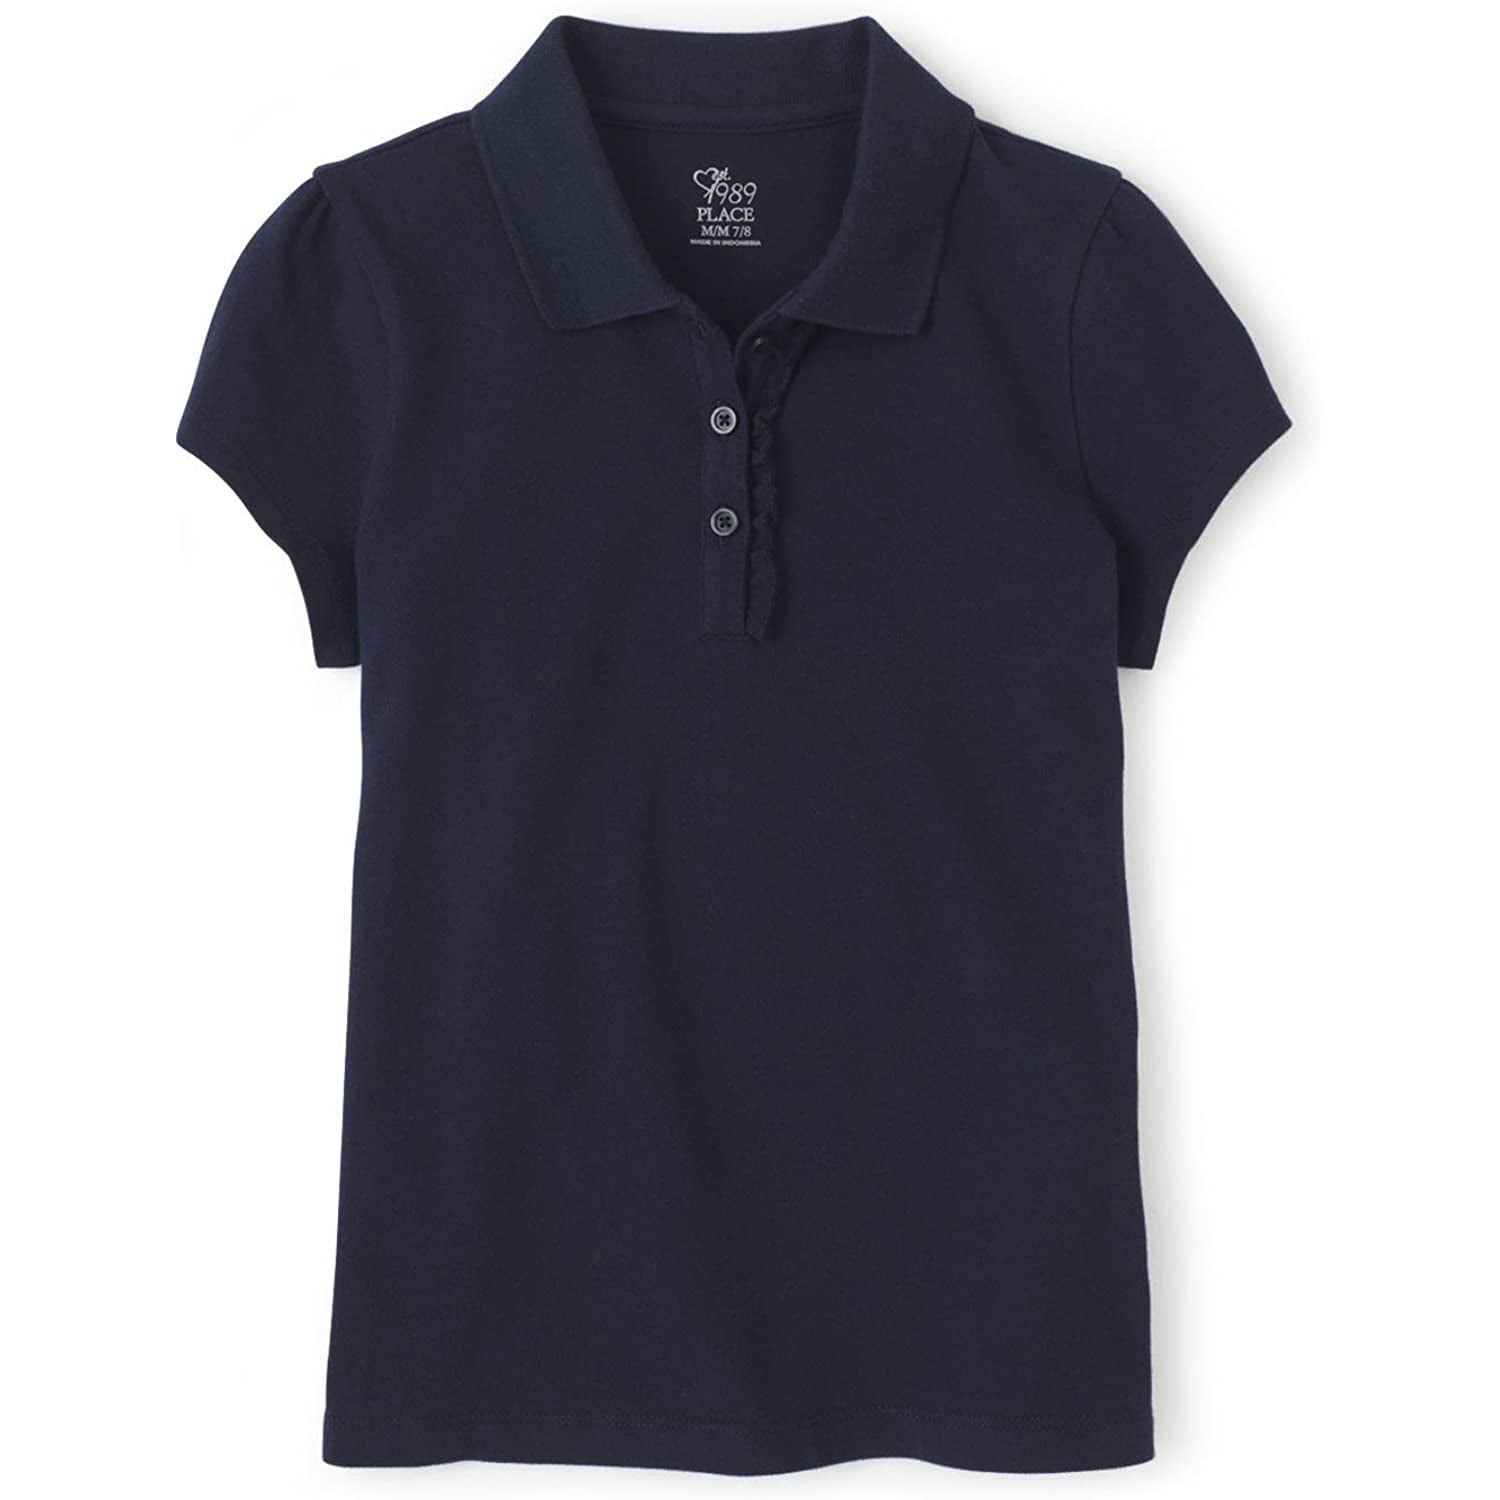 The Childrens Place Girls Little Uniform Short Sleeve Polo Ruffle 44391 Black Small//5//6